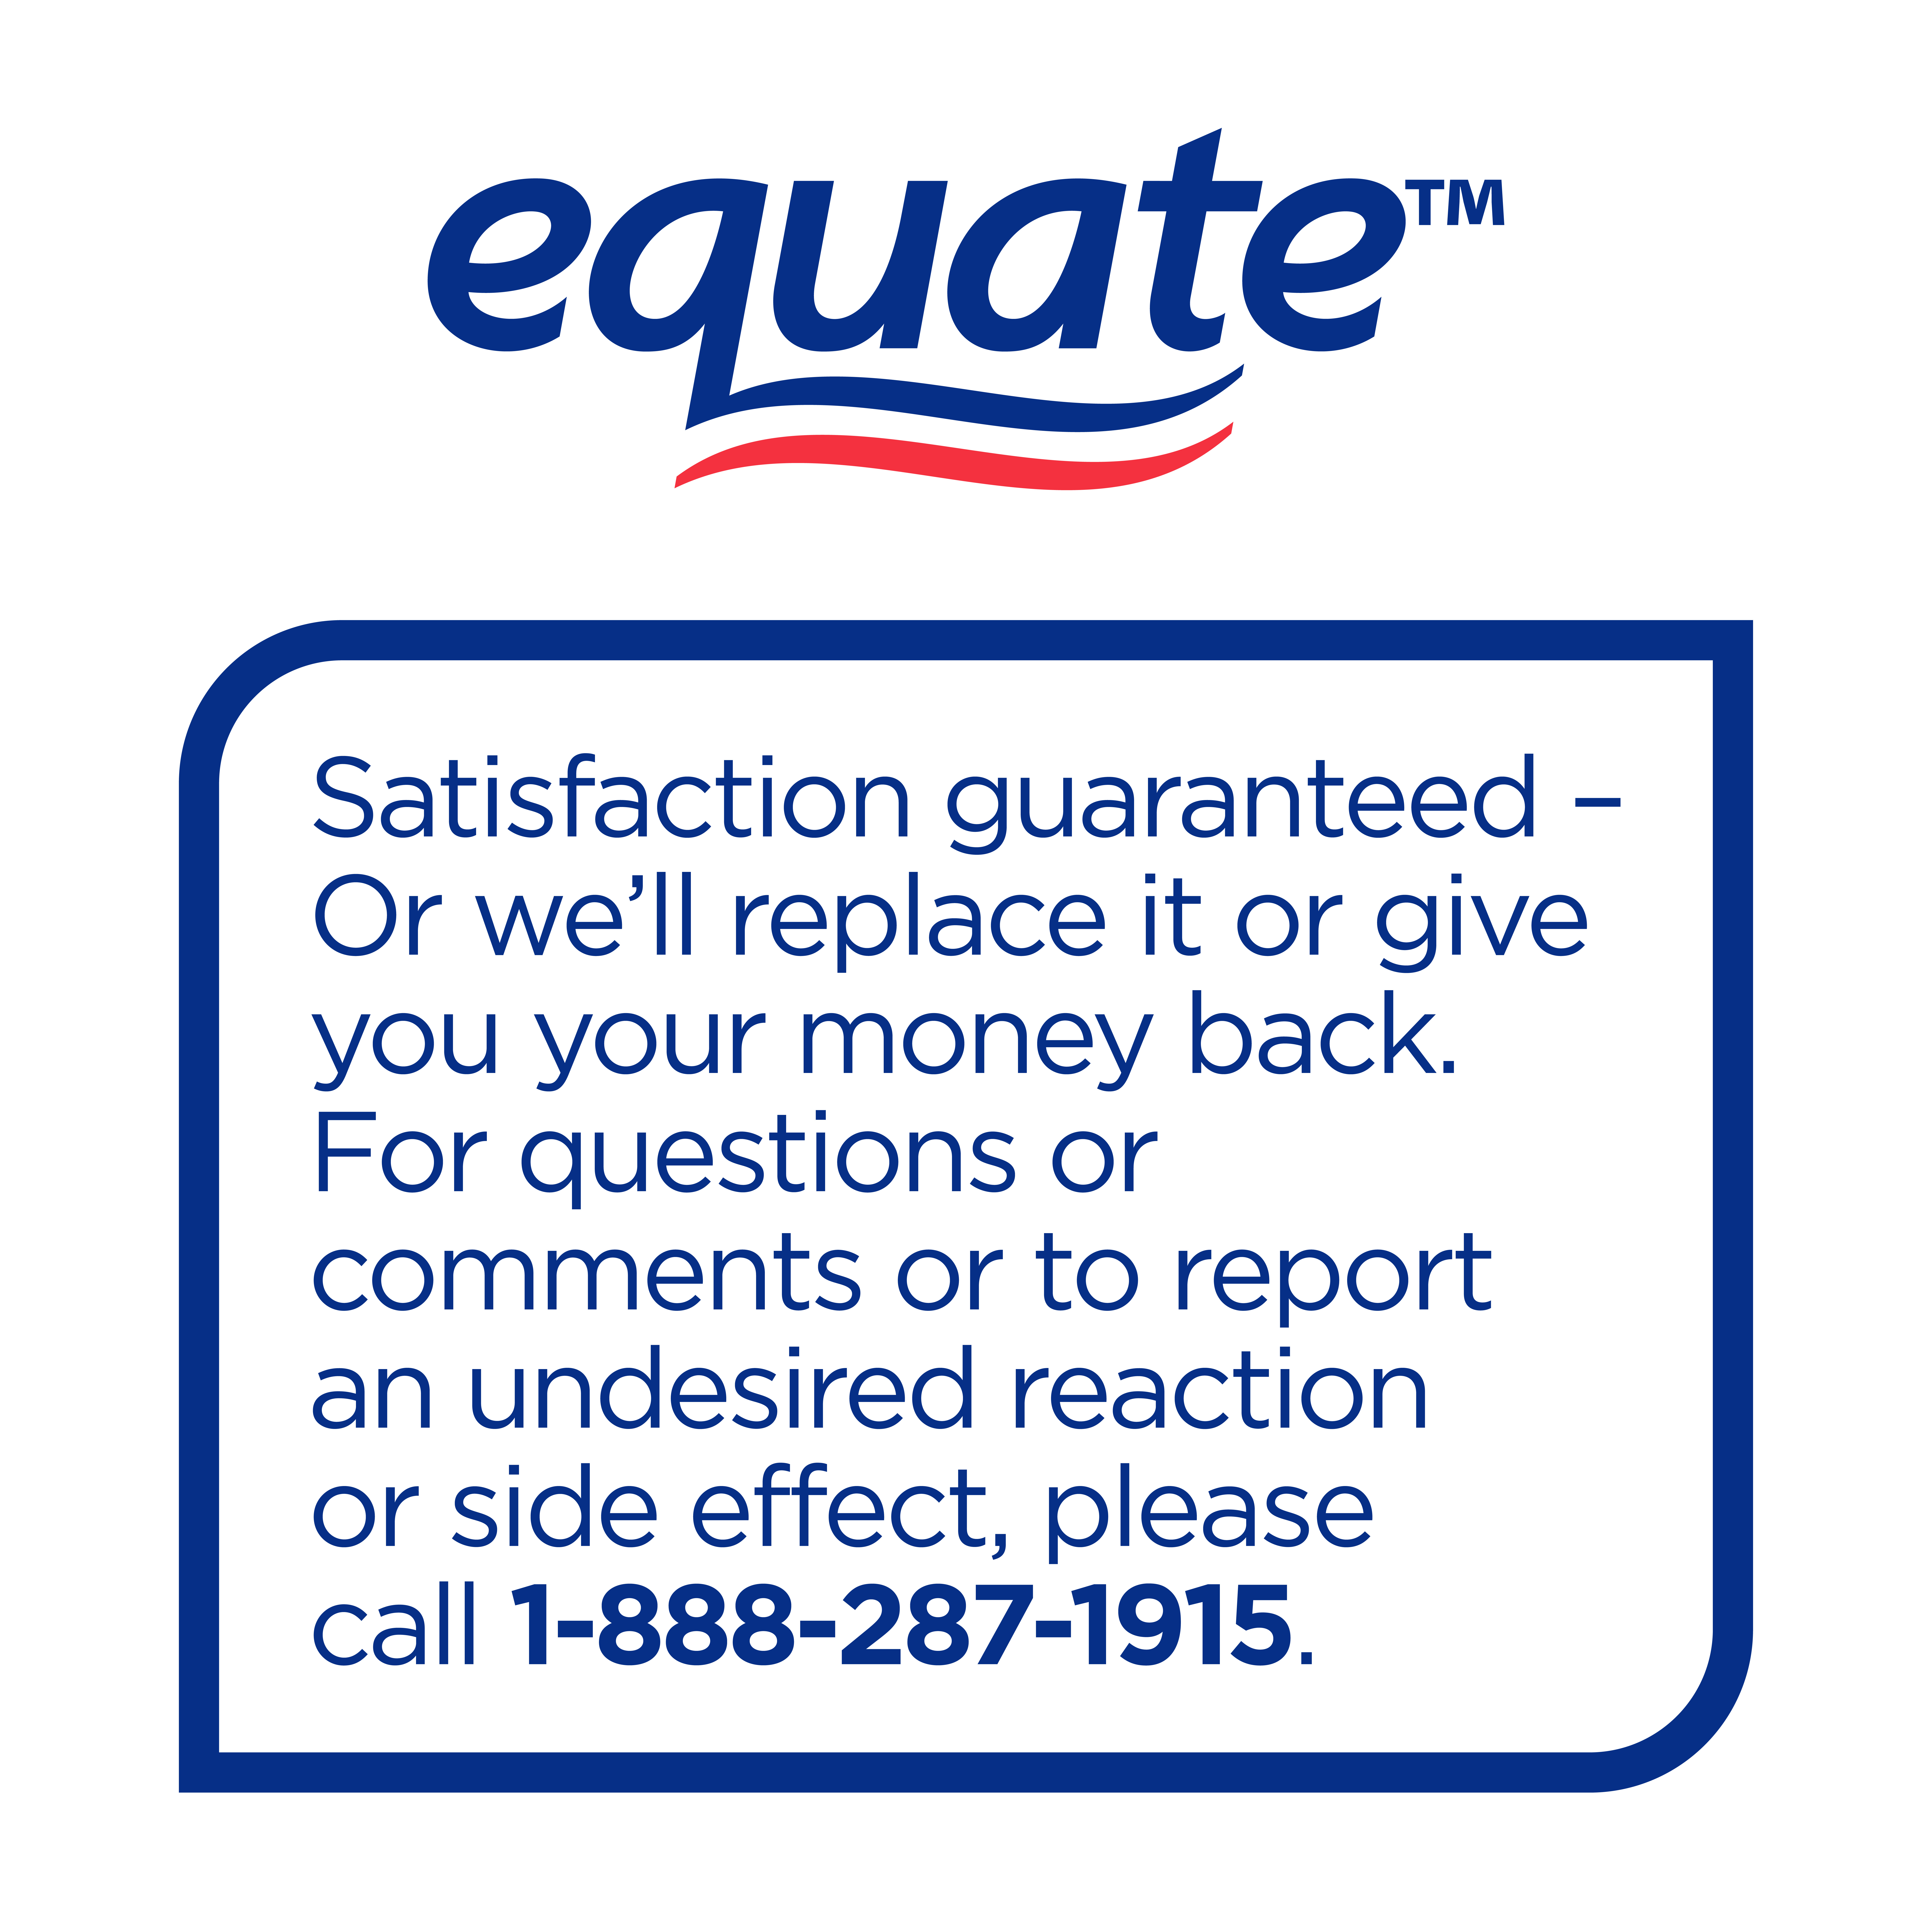 Equate Antibacterial Flexible Fabric Bandages, 100 Count - image 5 of 6